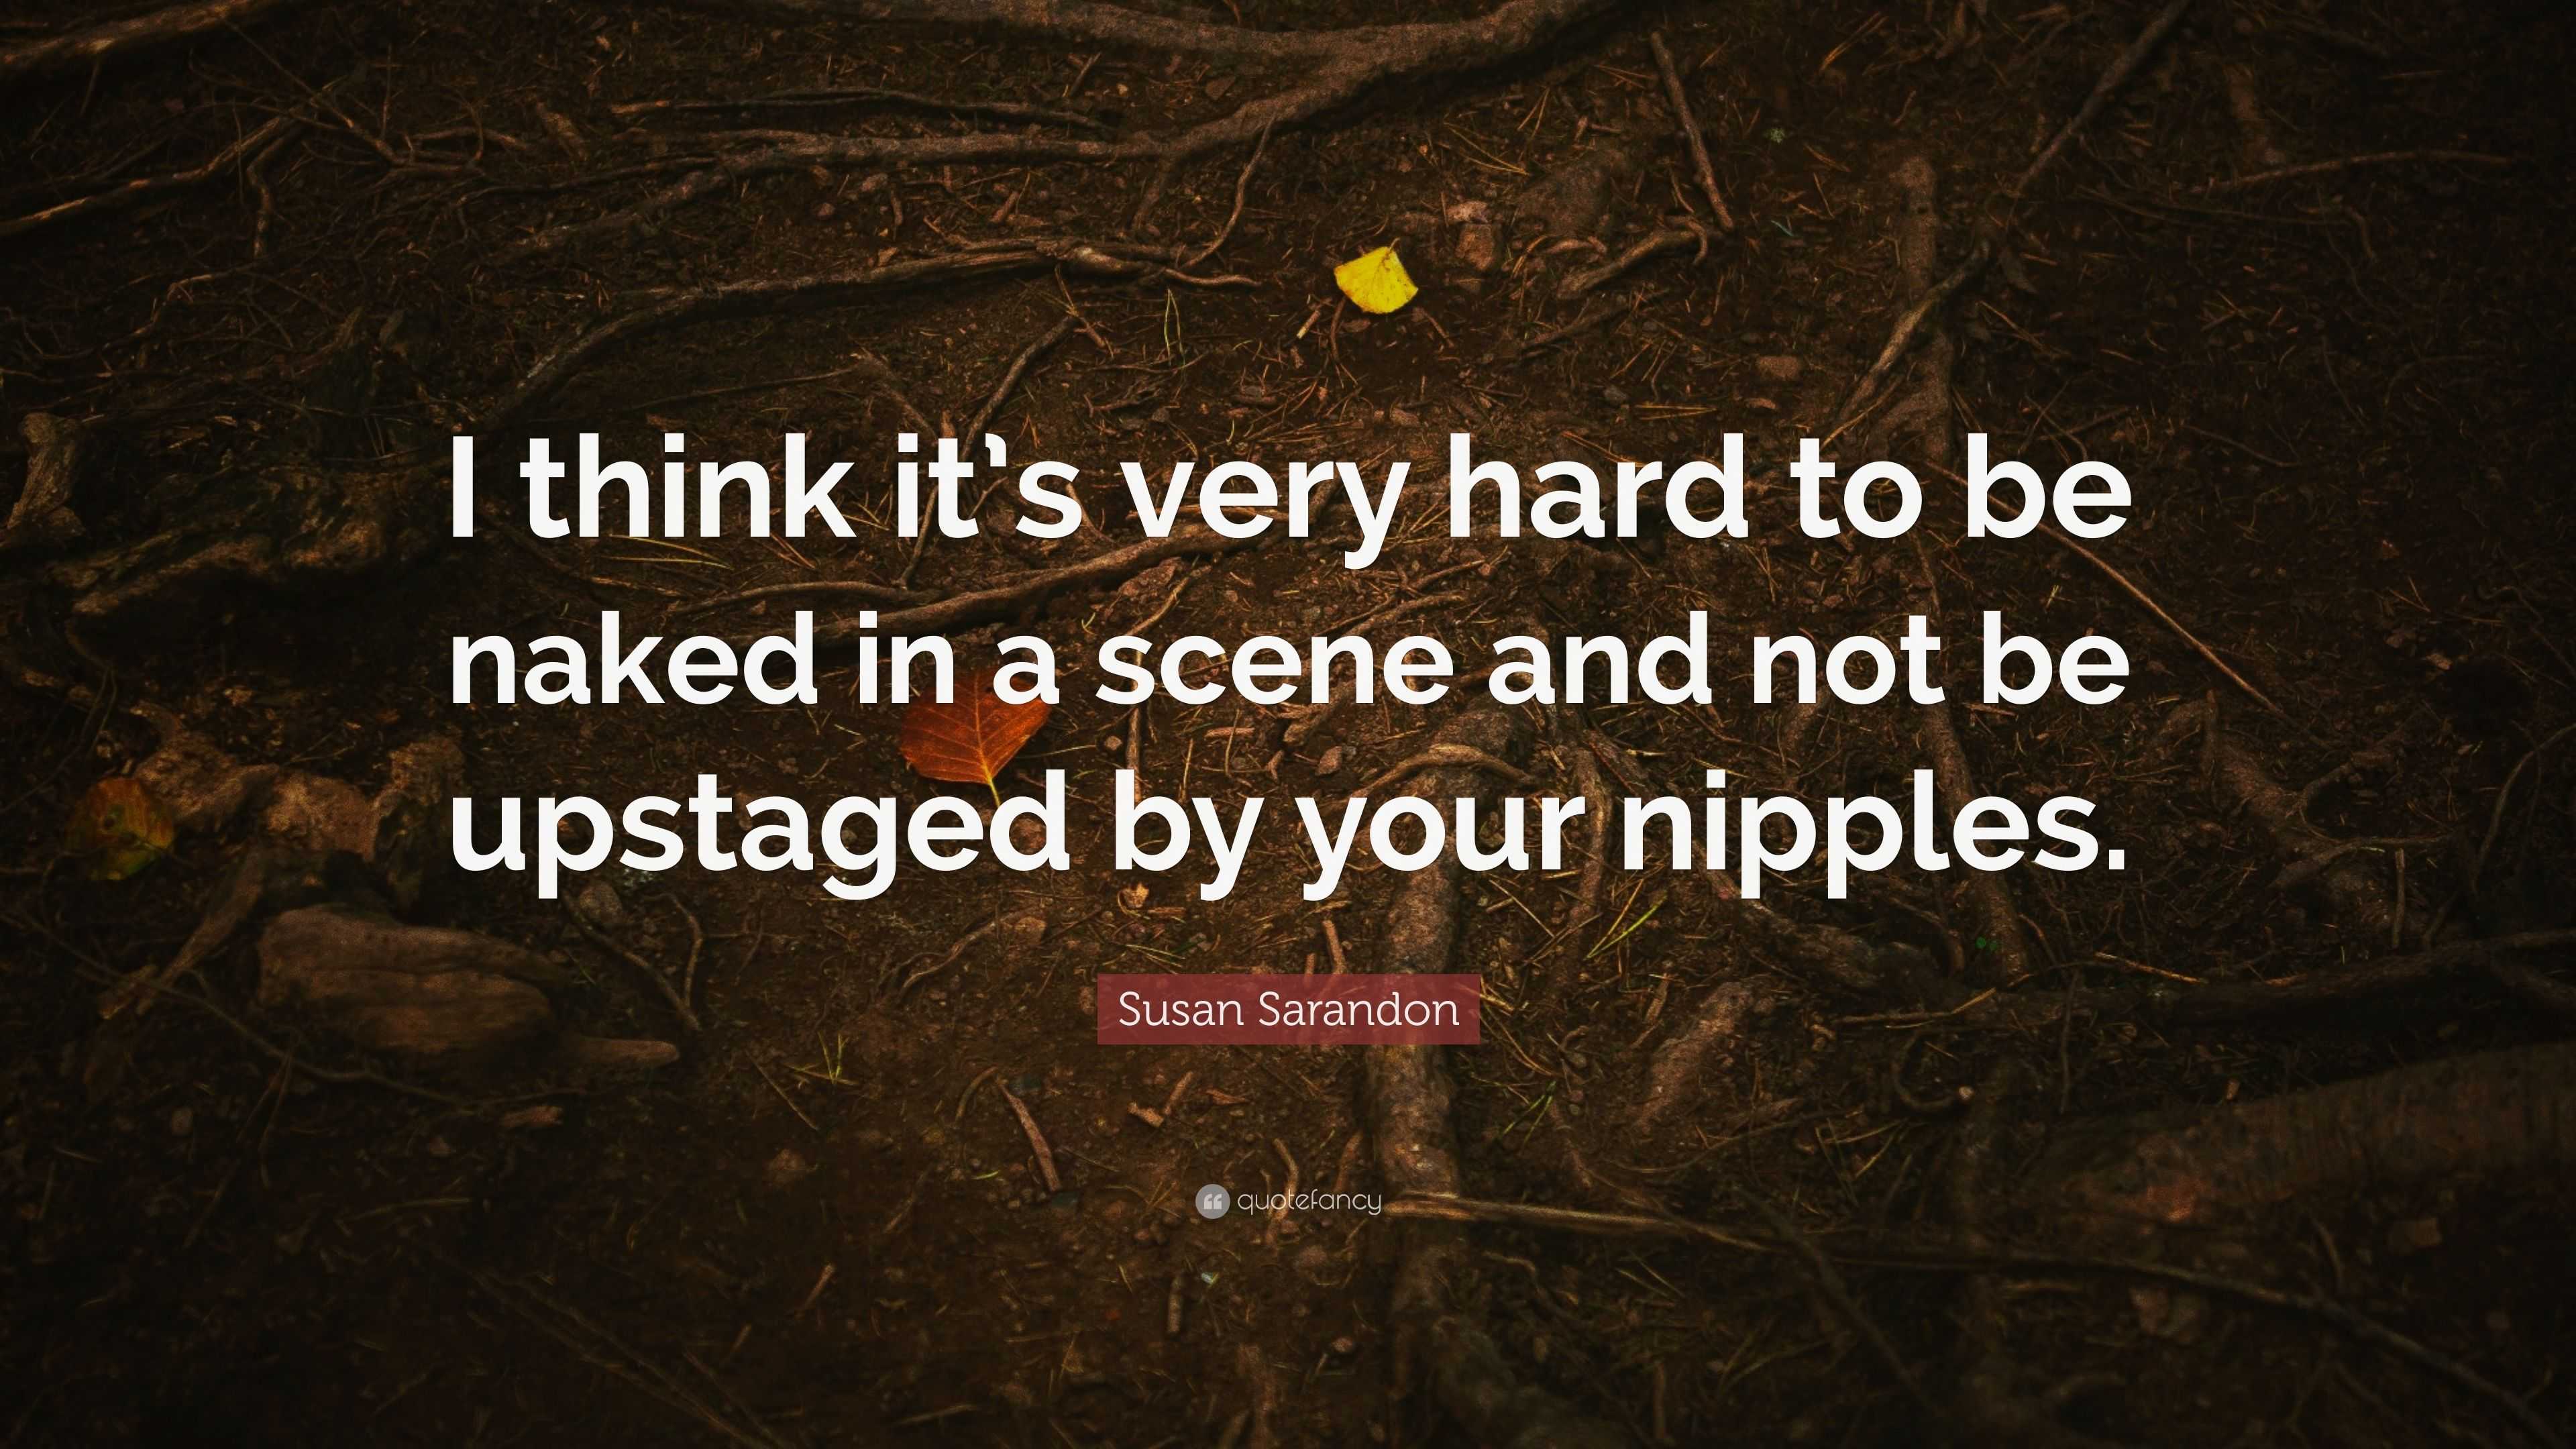 Susan Sarandon Quote I Think Its Very Hard To Be Naked In A Scene And Not Be Upstaged By Your